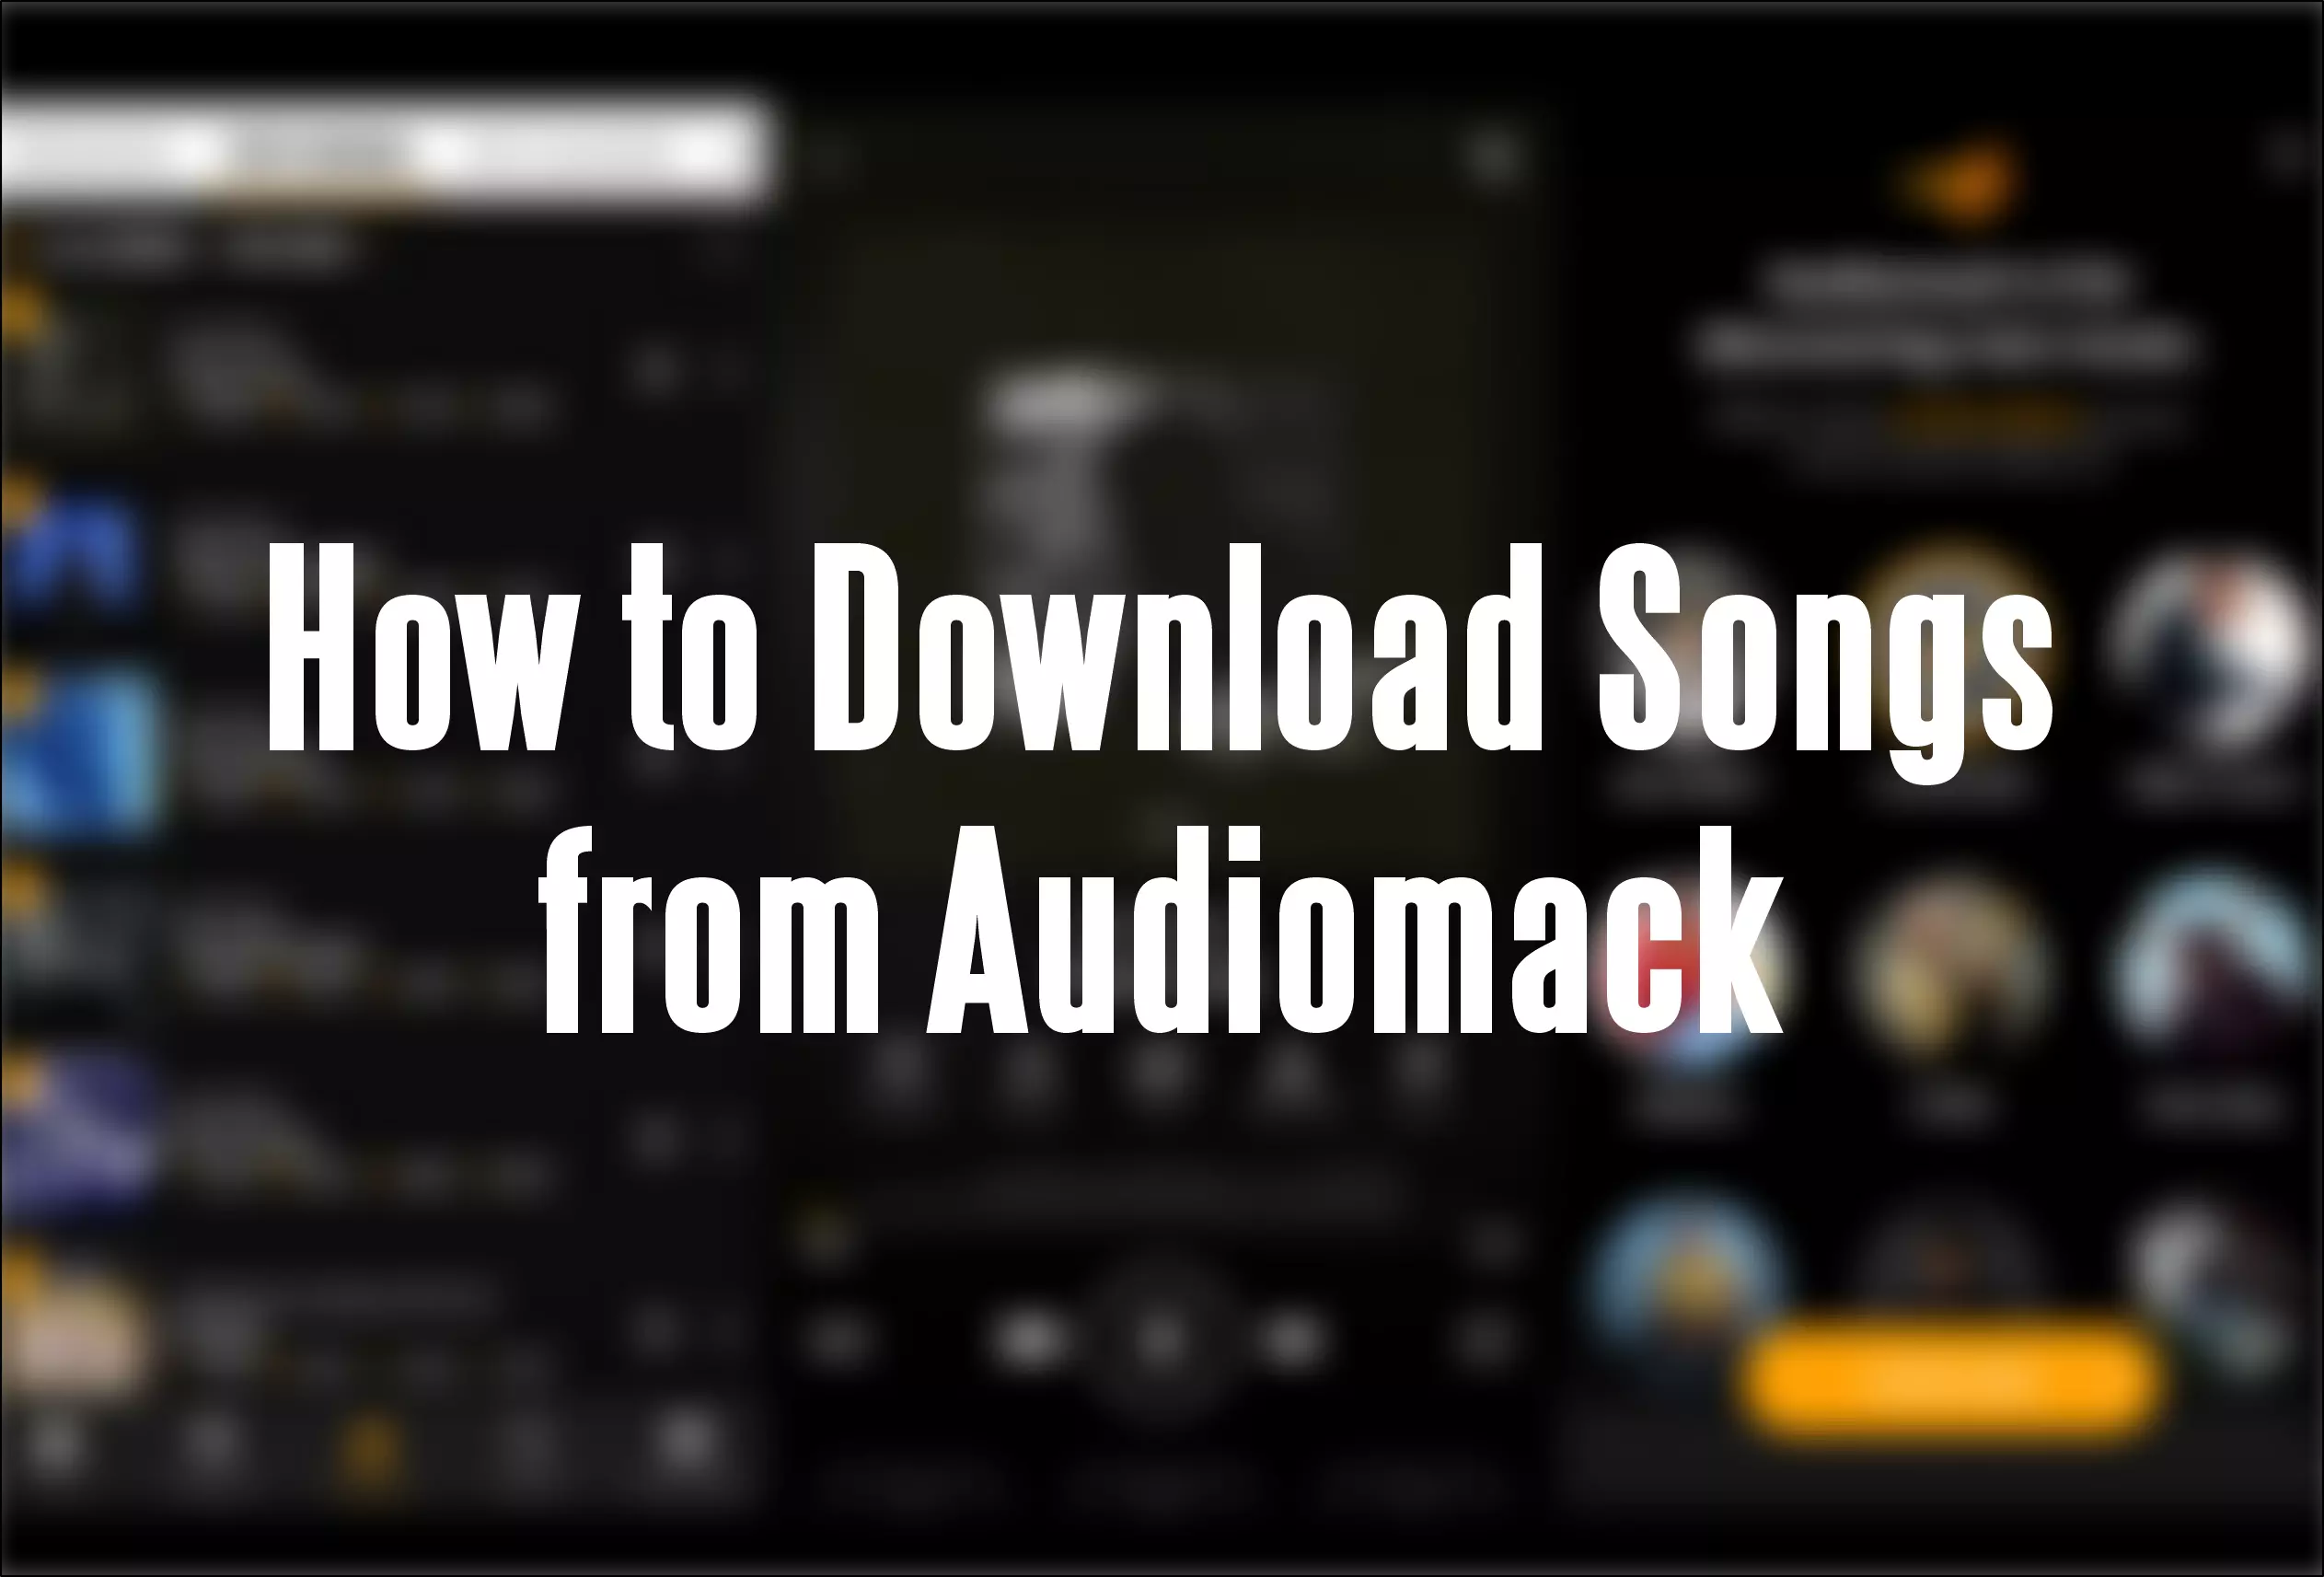 How to Download Songs from Audiomack